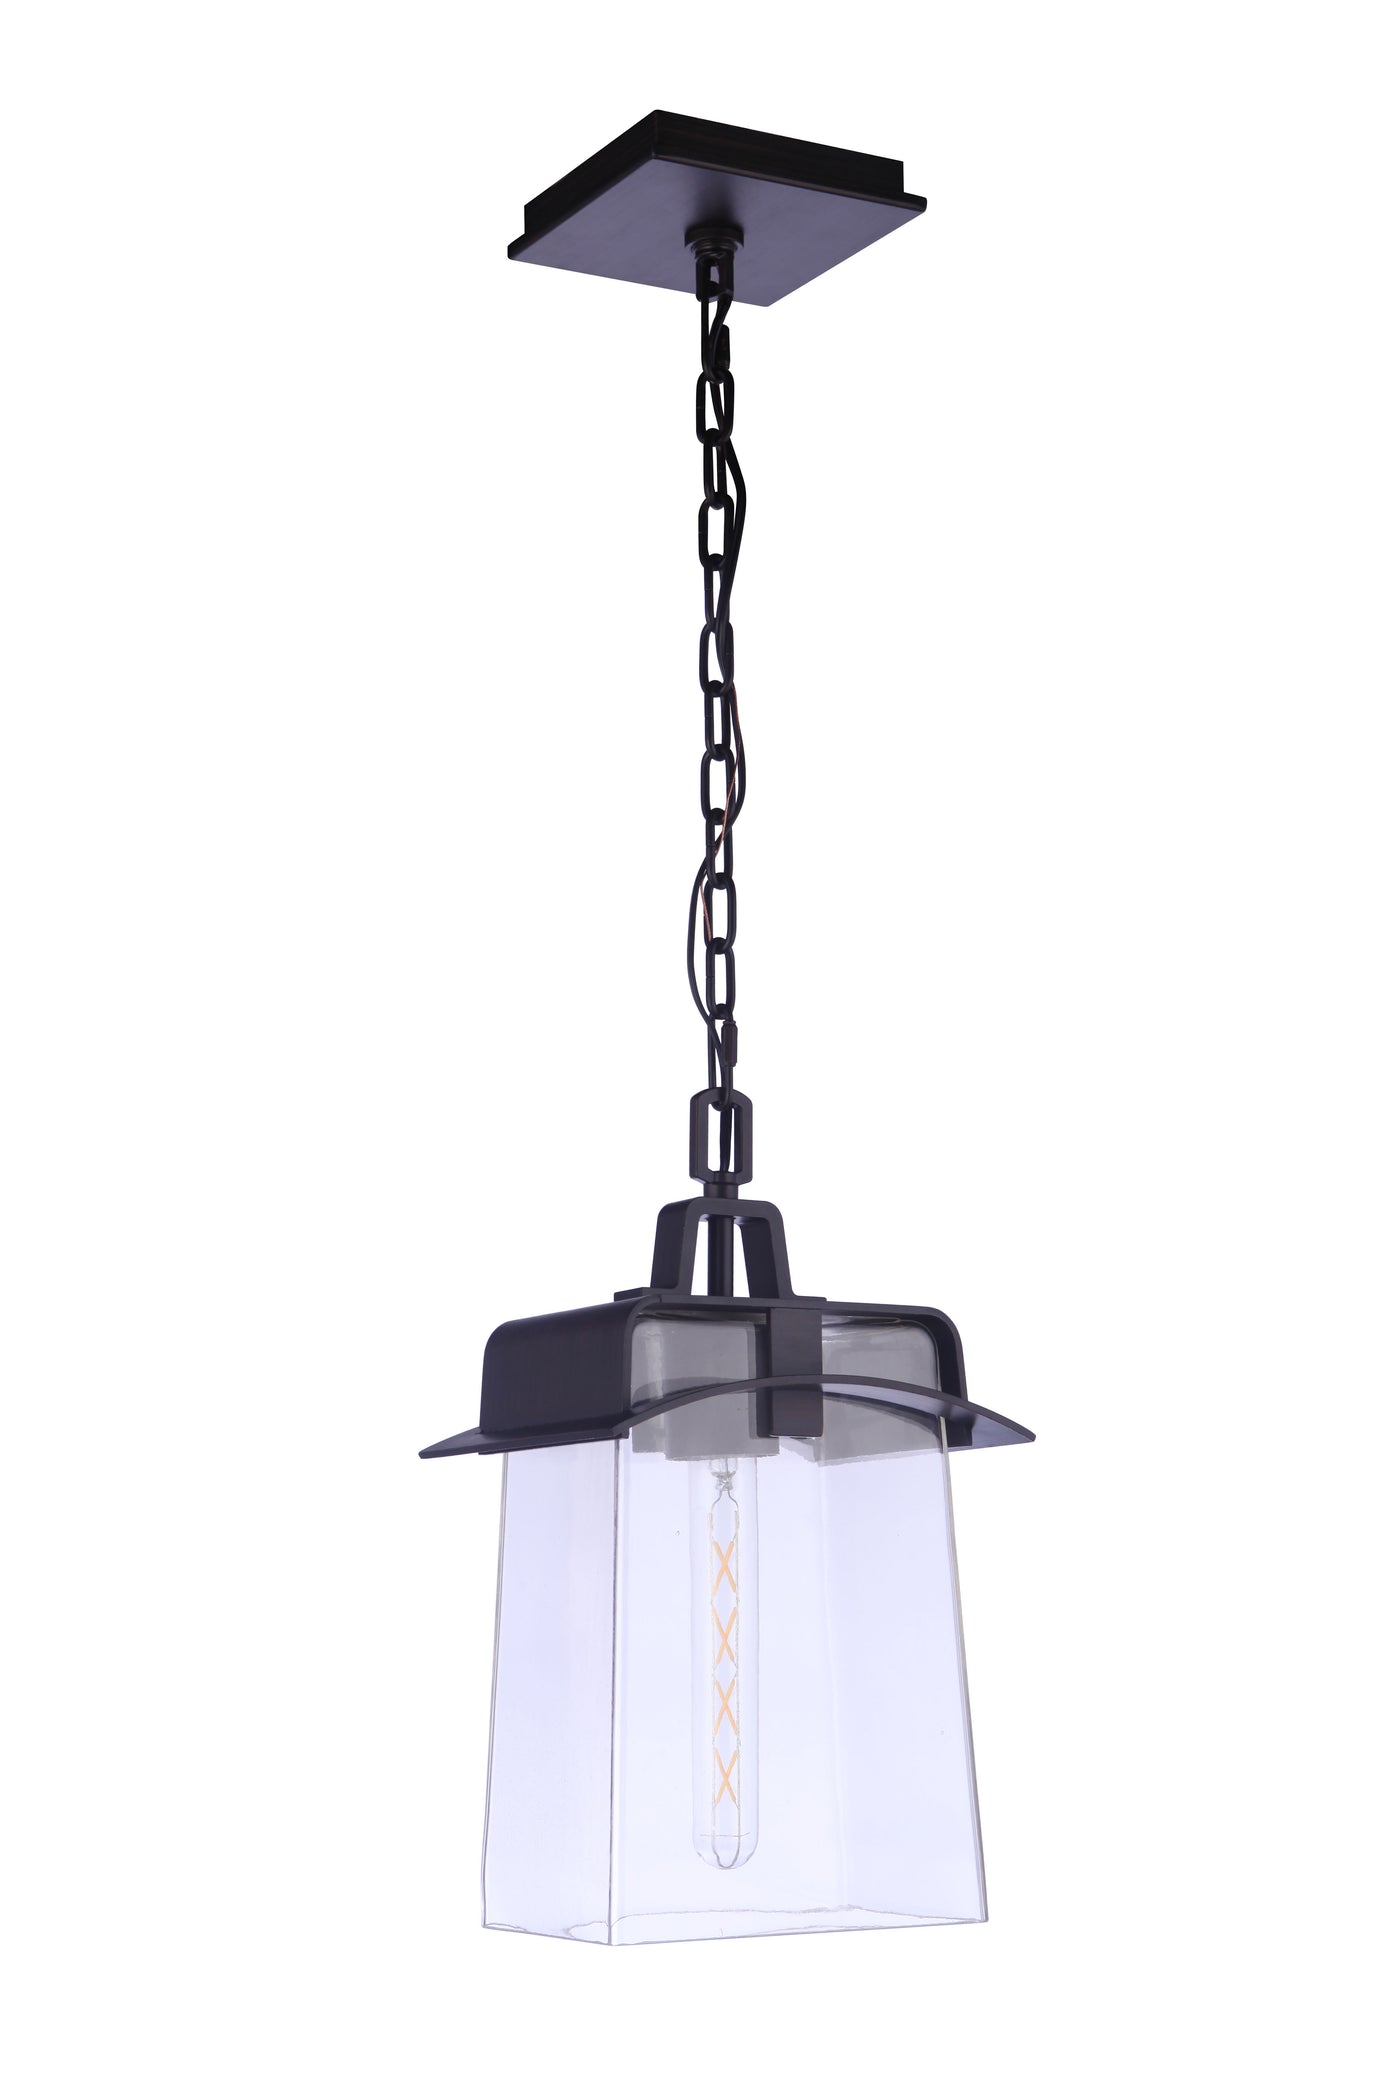 Smithy 1 Light Outdoor Pendant in Age Bronze Brushed